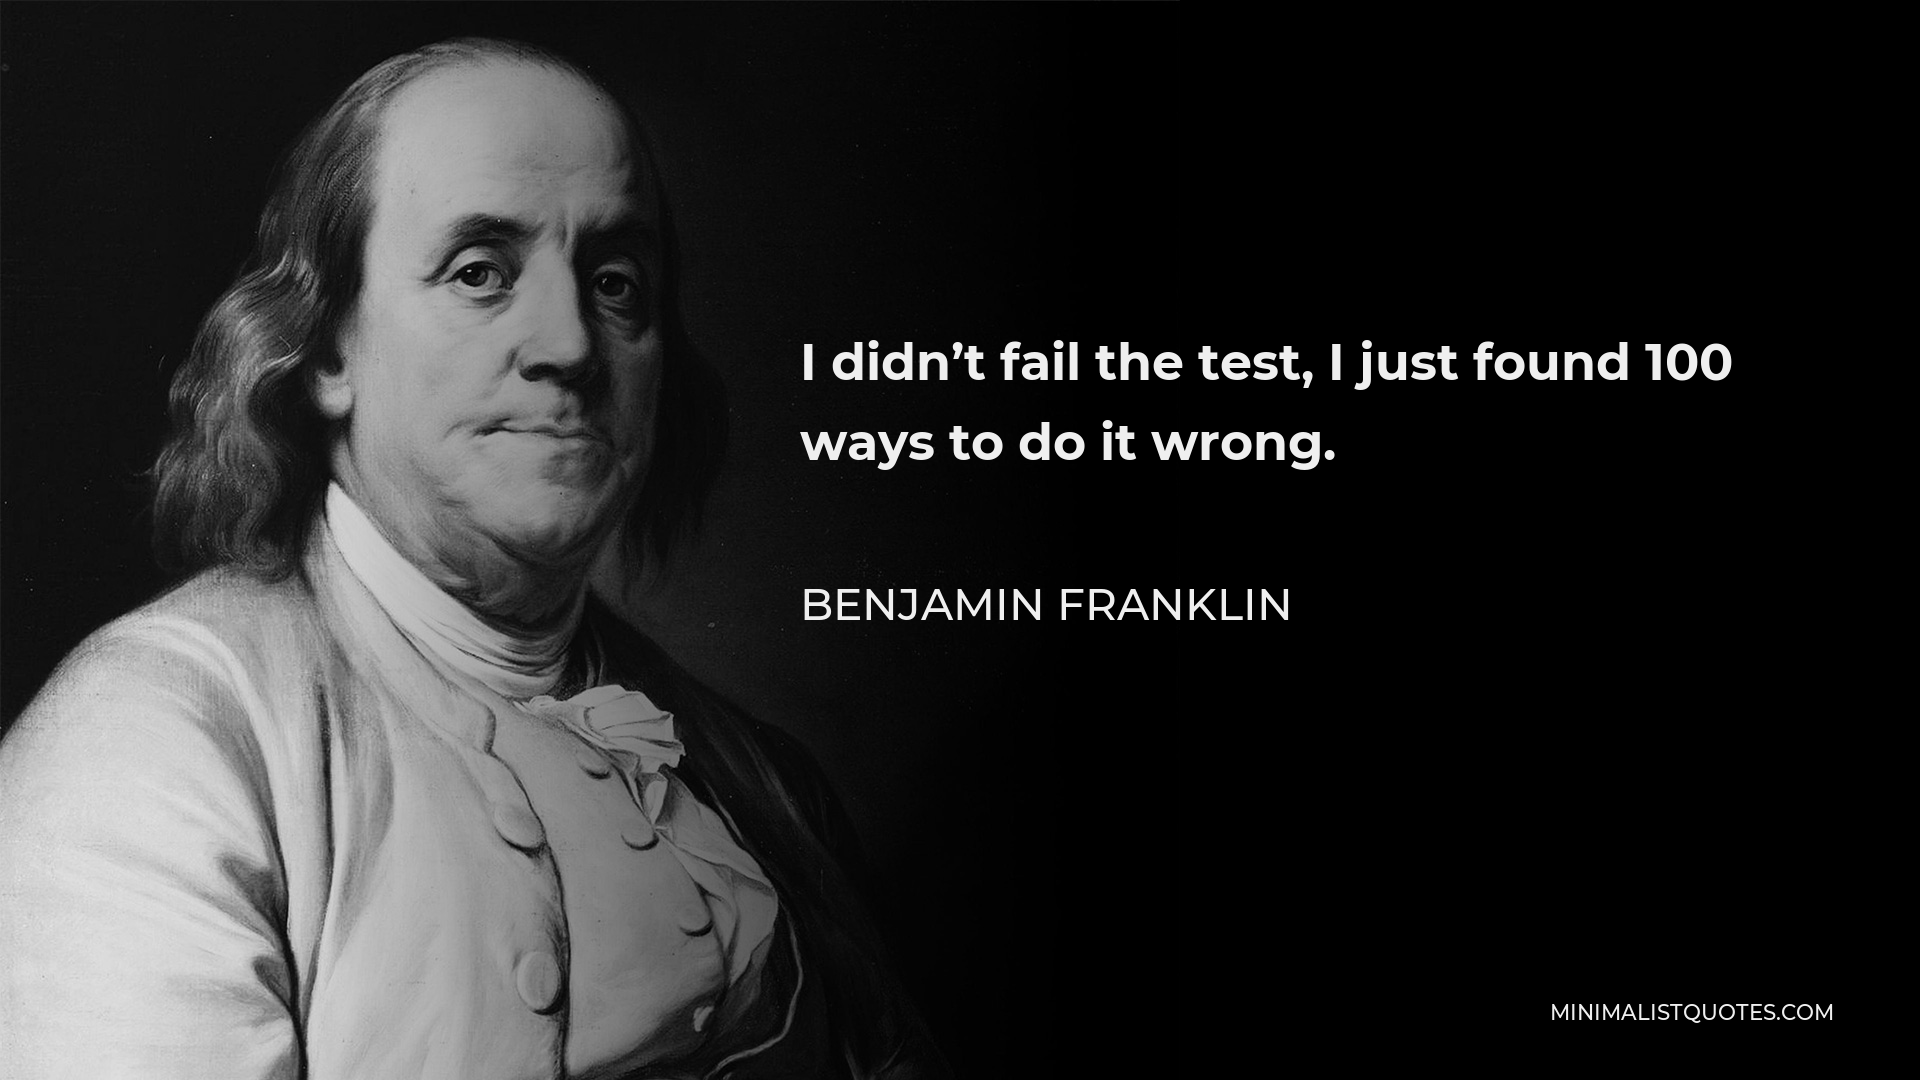 Benjamin Franklin Quote - I didn’t fail the test, I just found 100 ways to do it wrong.